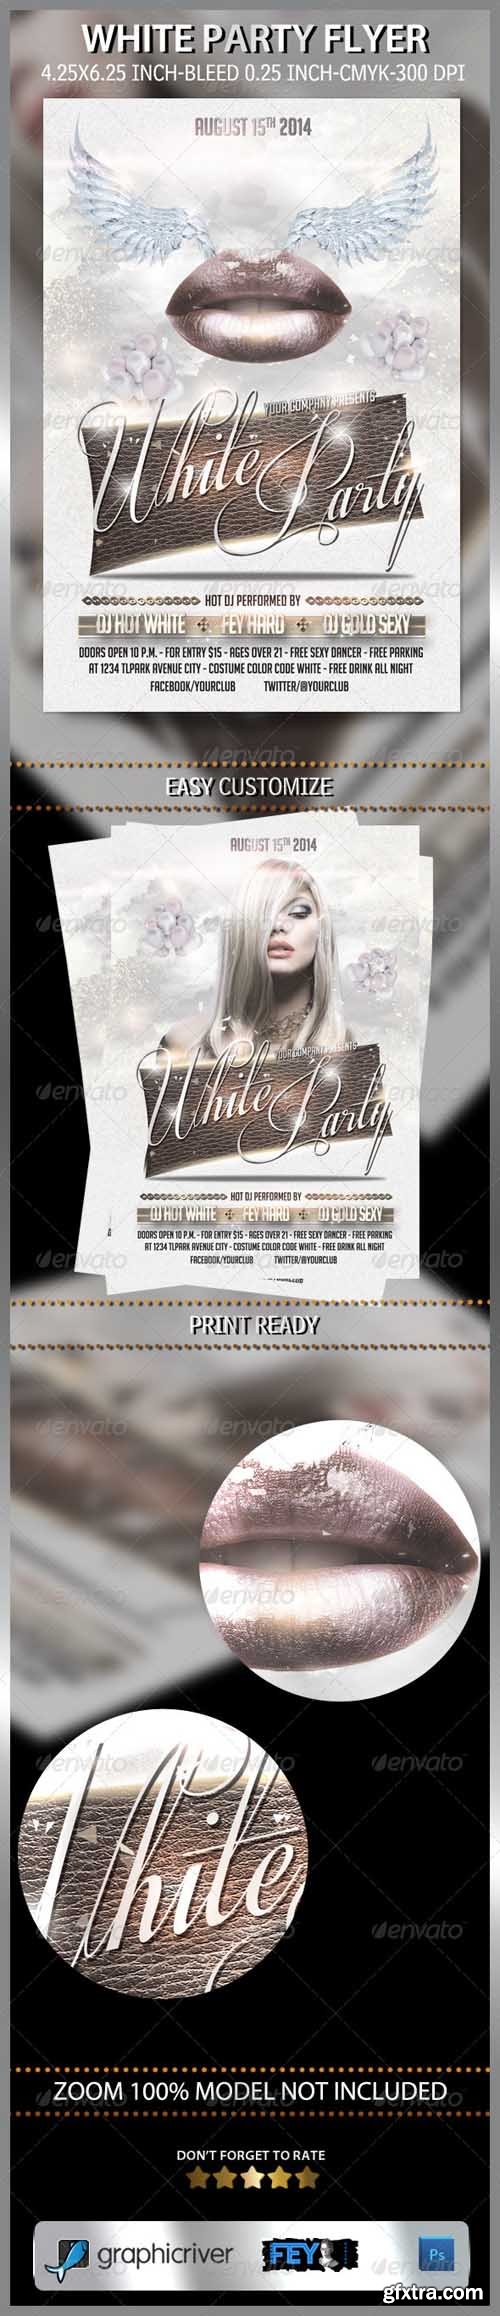 GR - White Party Flyer 7323609